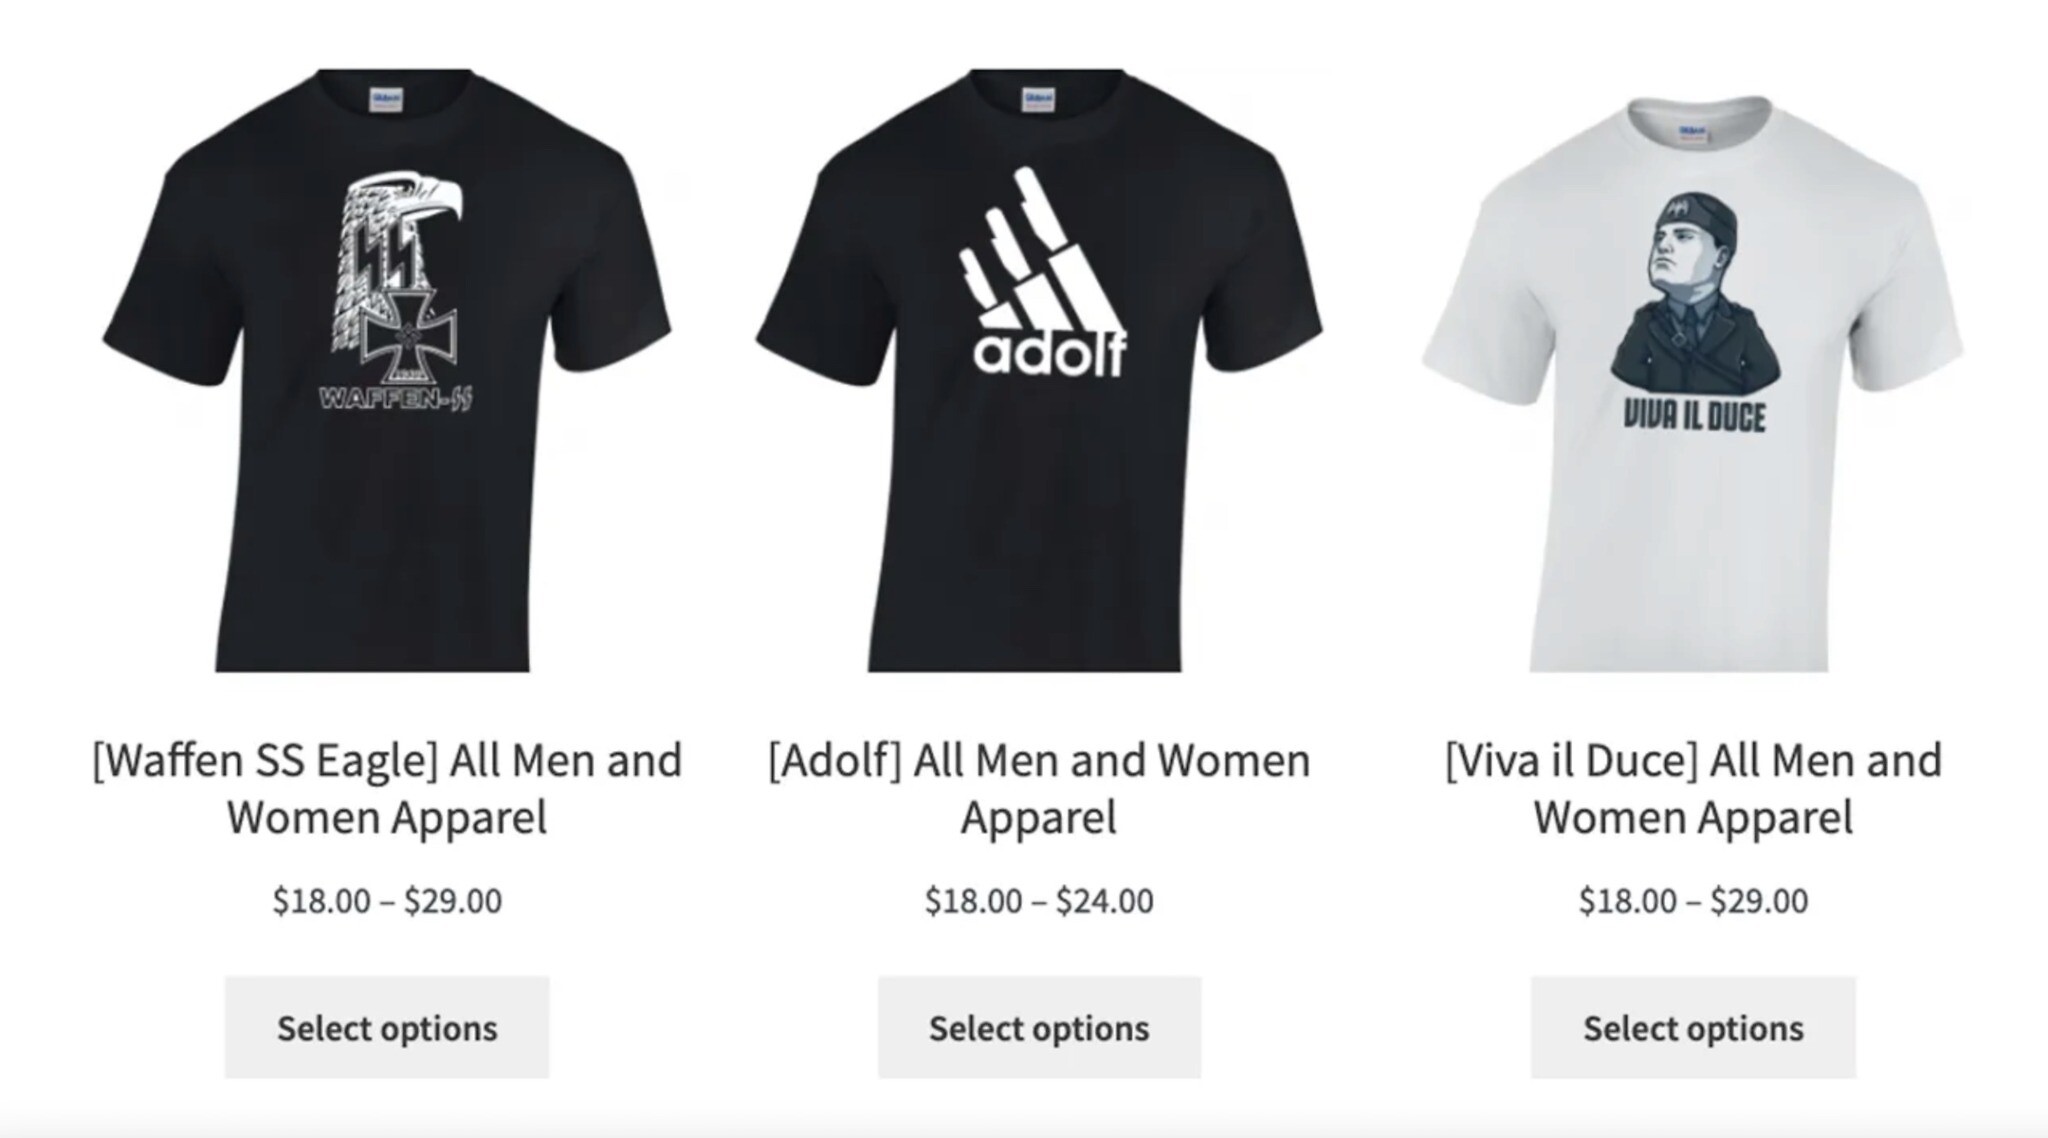 Bay Area anti-Semite is selling Hitler T-shirts online Times of Israel